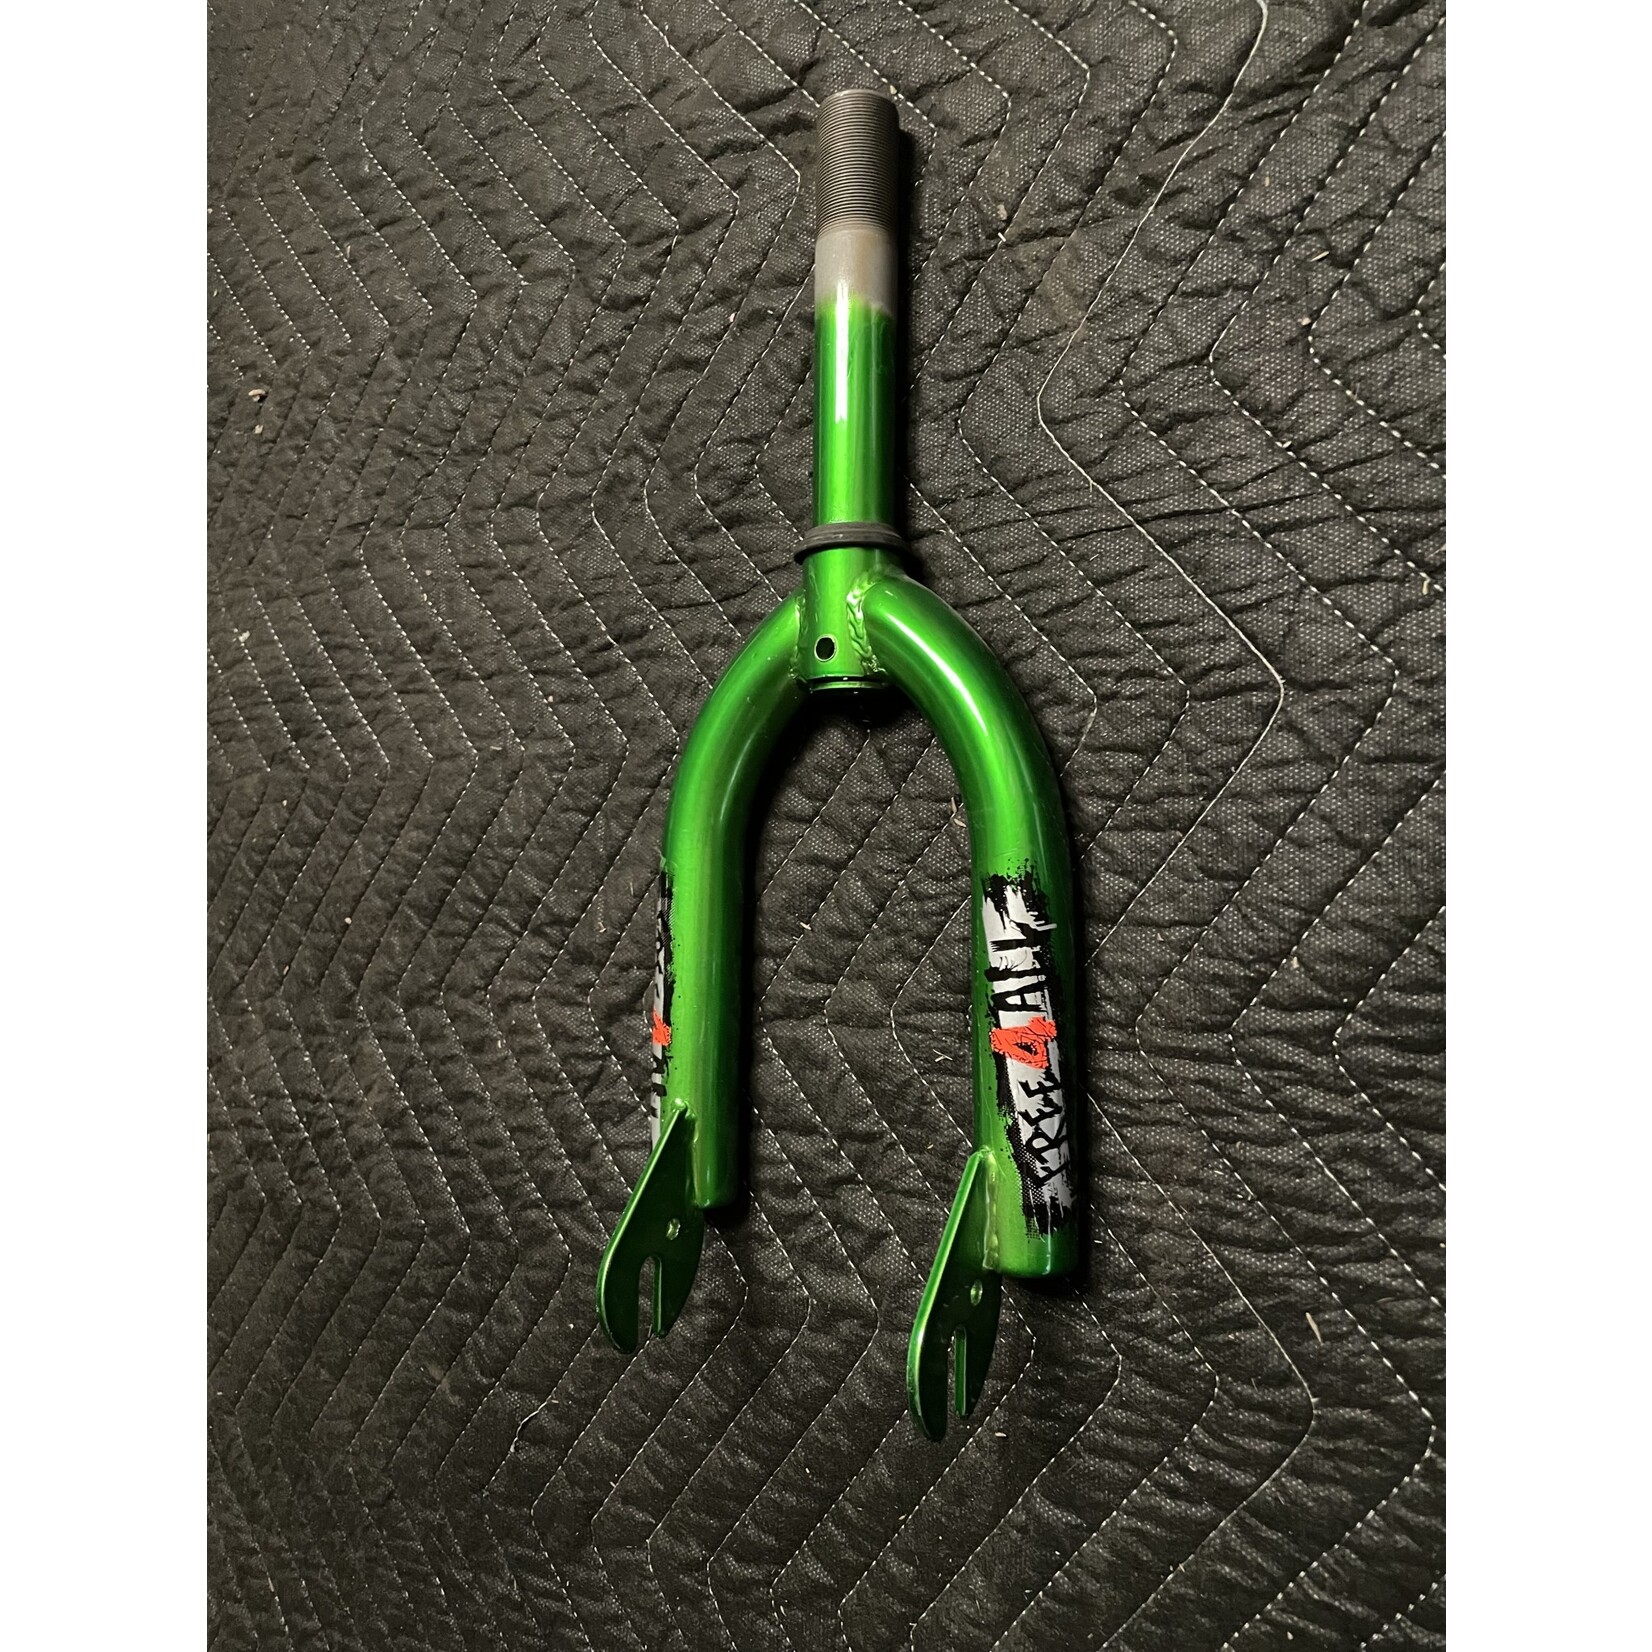 Kent Free 4 All 12” Children’s Bicycle Fork 5” Steer Tube (Green)